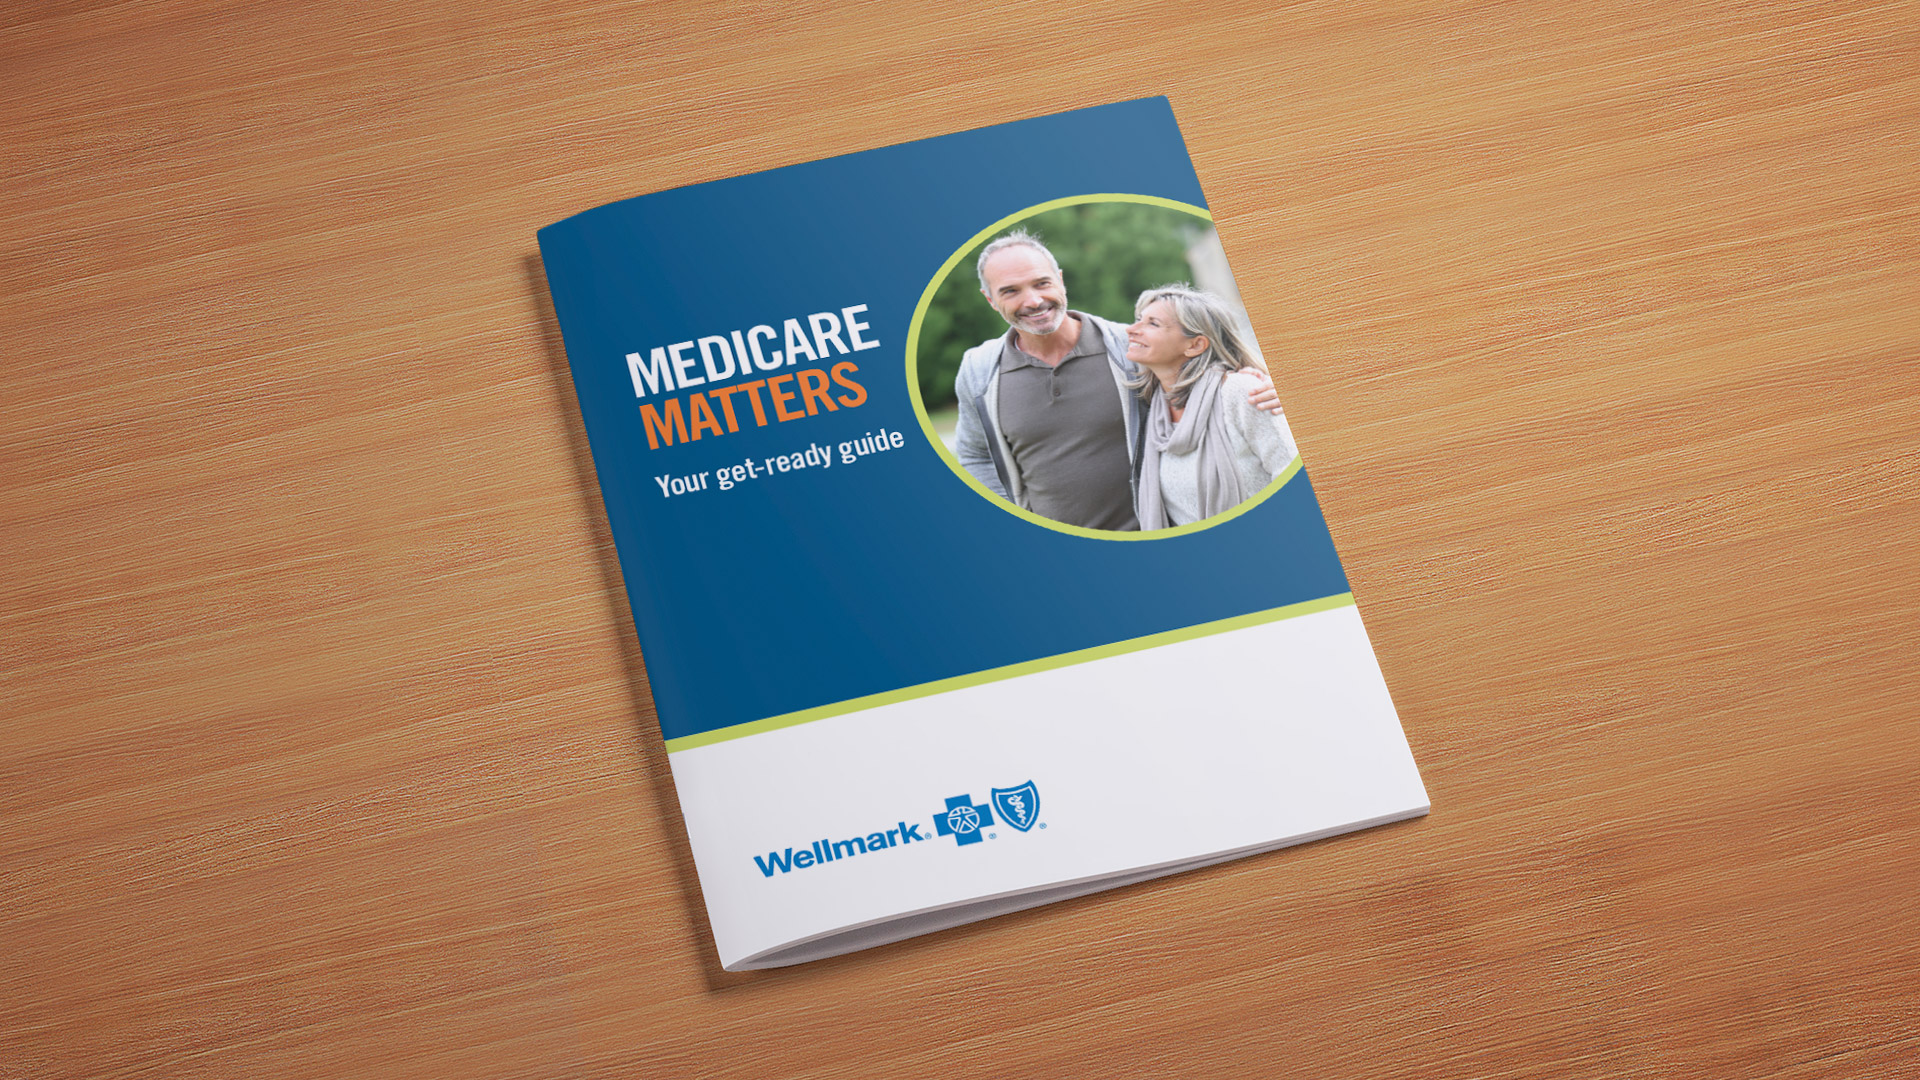 Wellmark Medicare Matters Get-Ready Guide